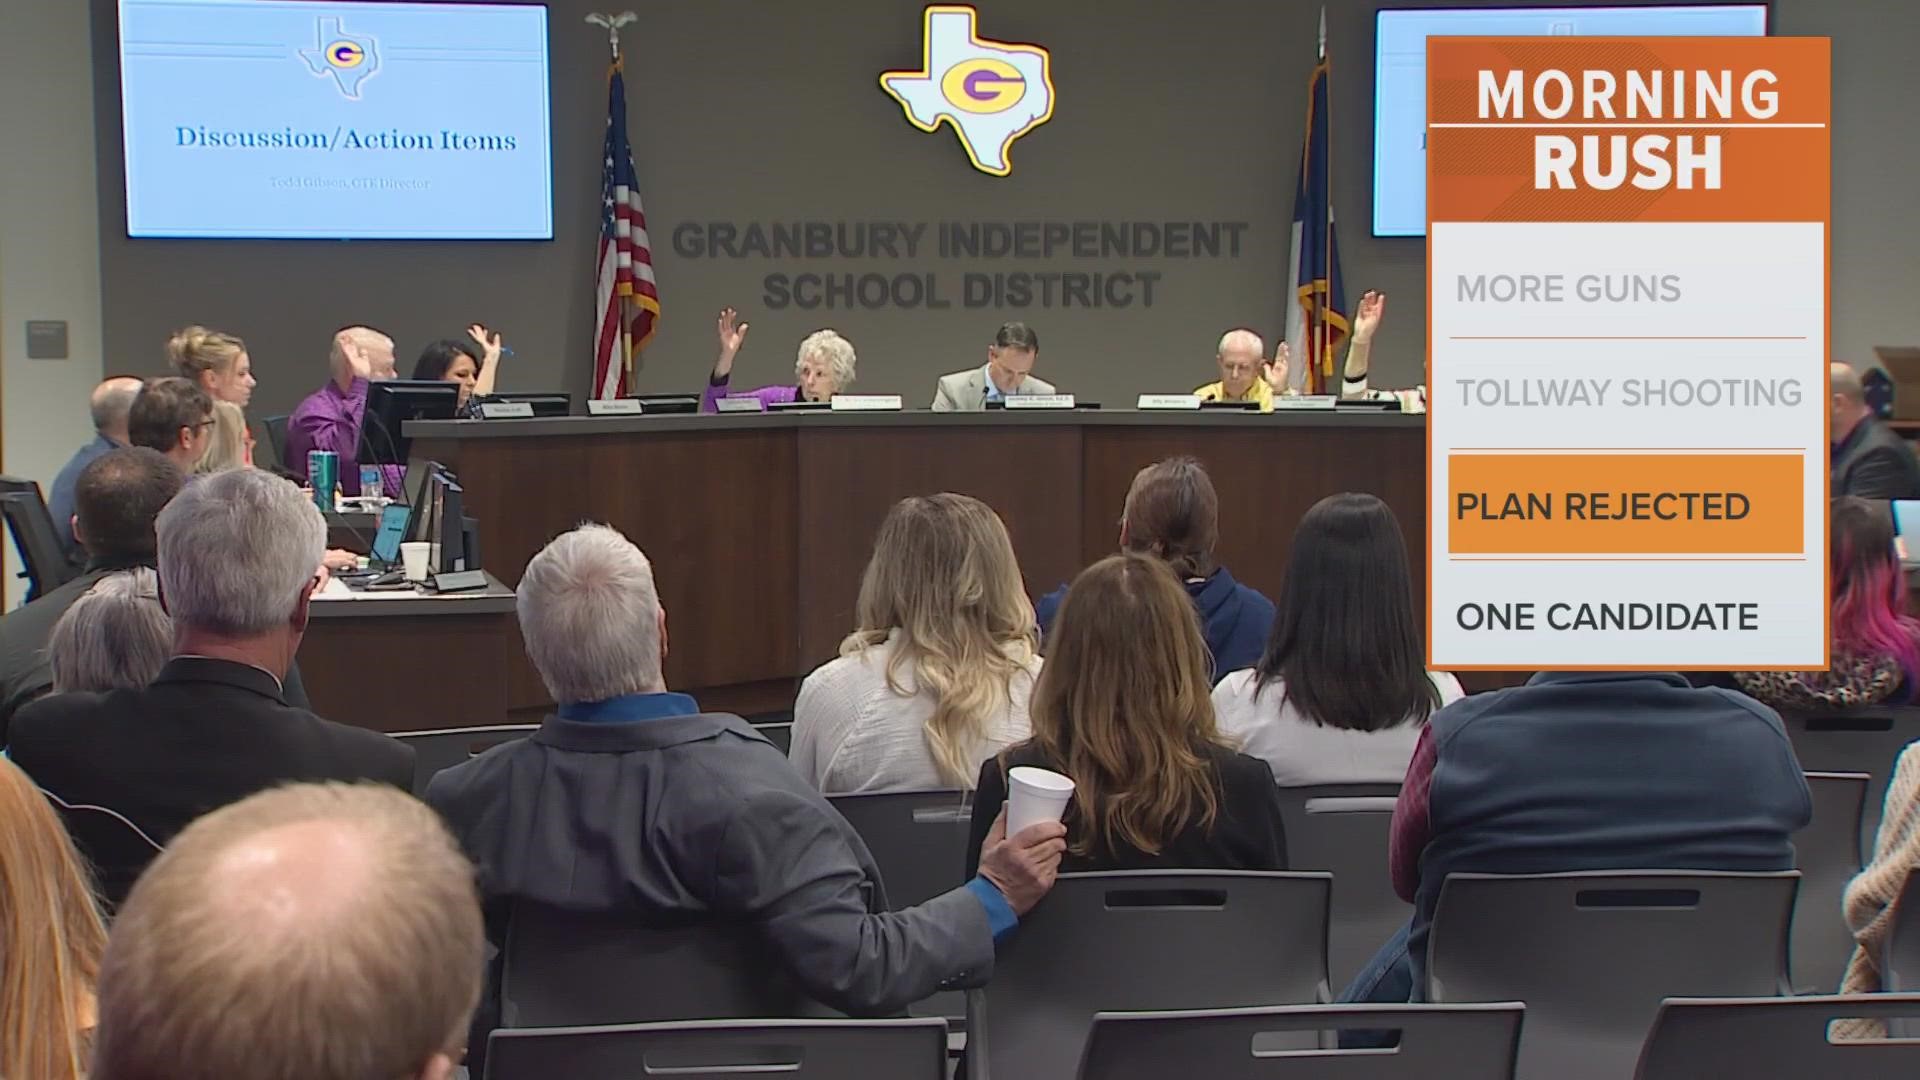 granbury-isd-rejects-plan-to-require-staff-to-report-criminal-act-wfaa